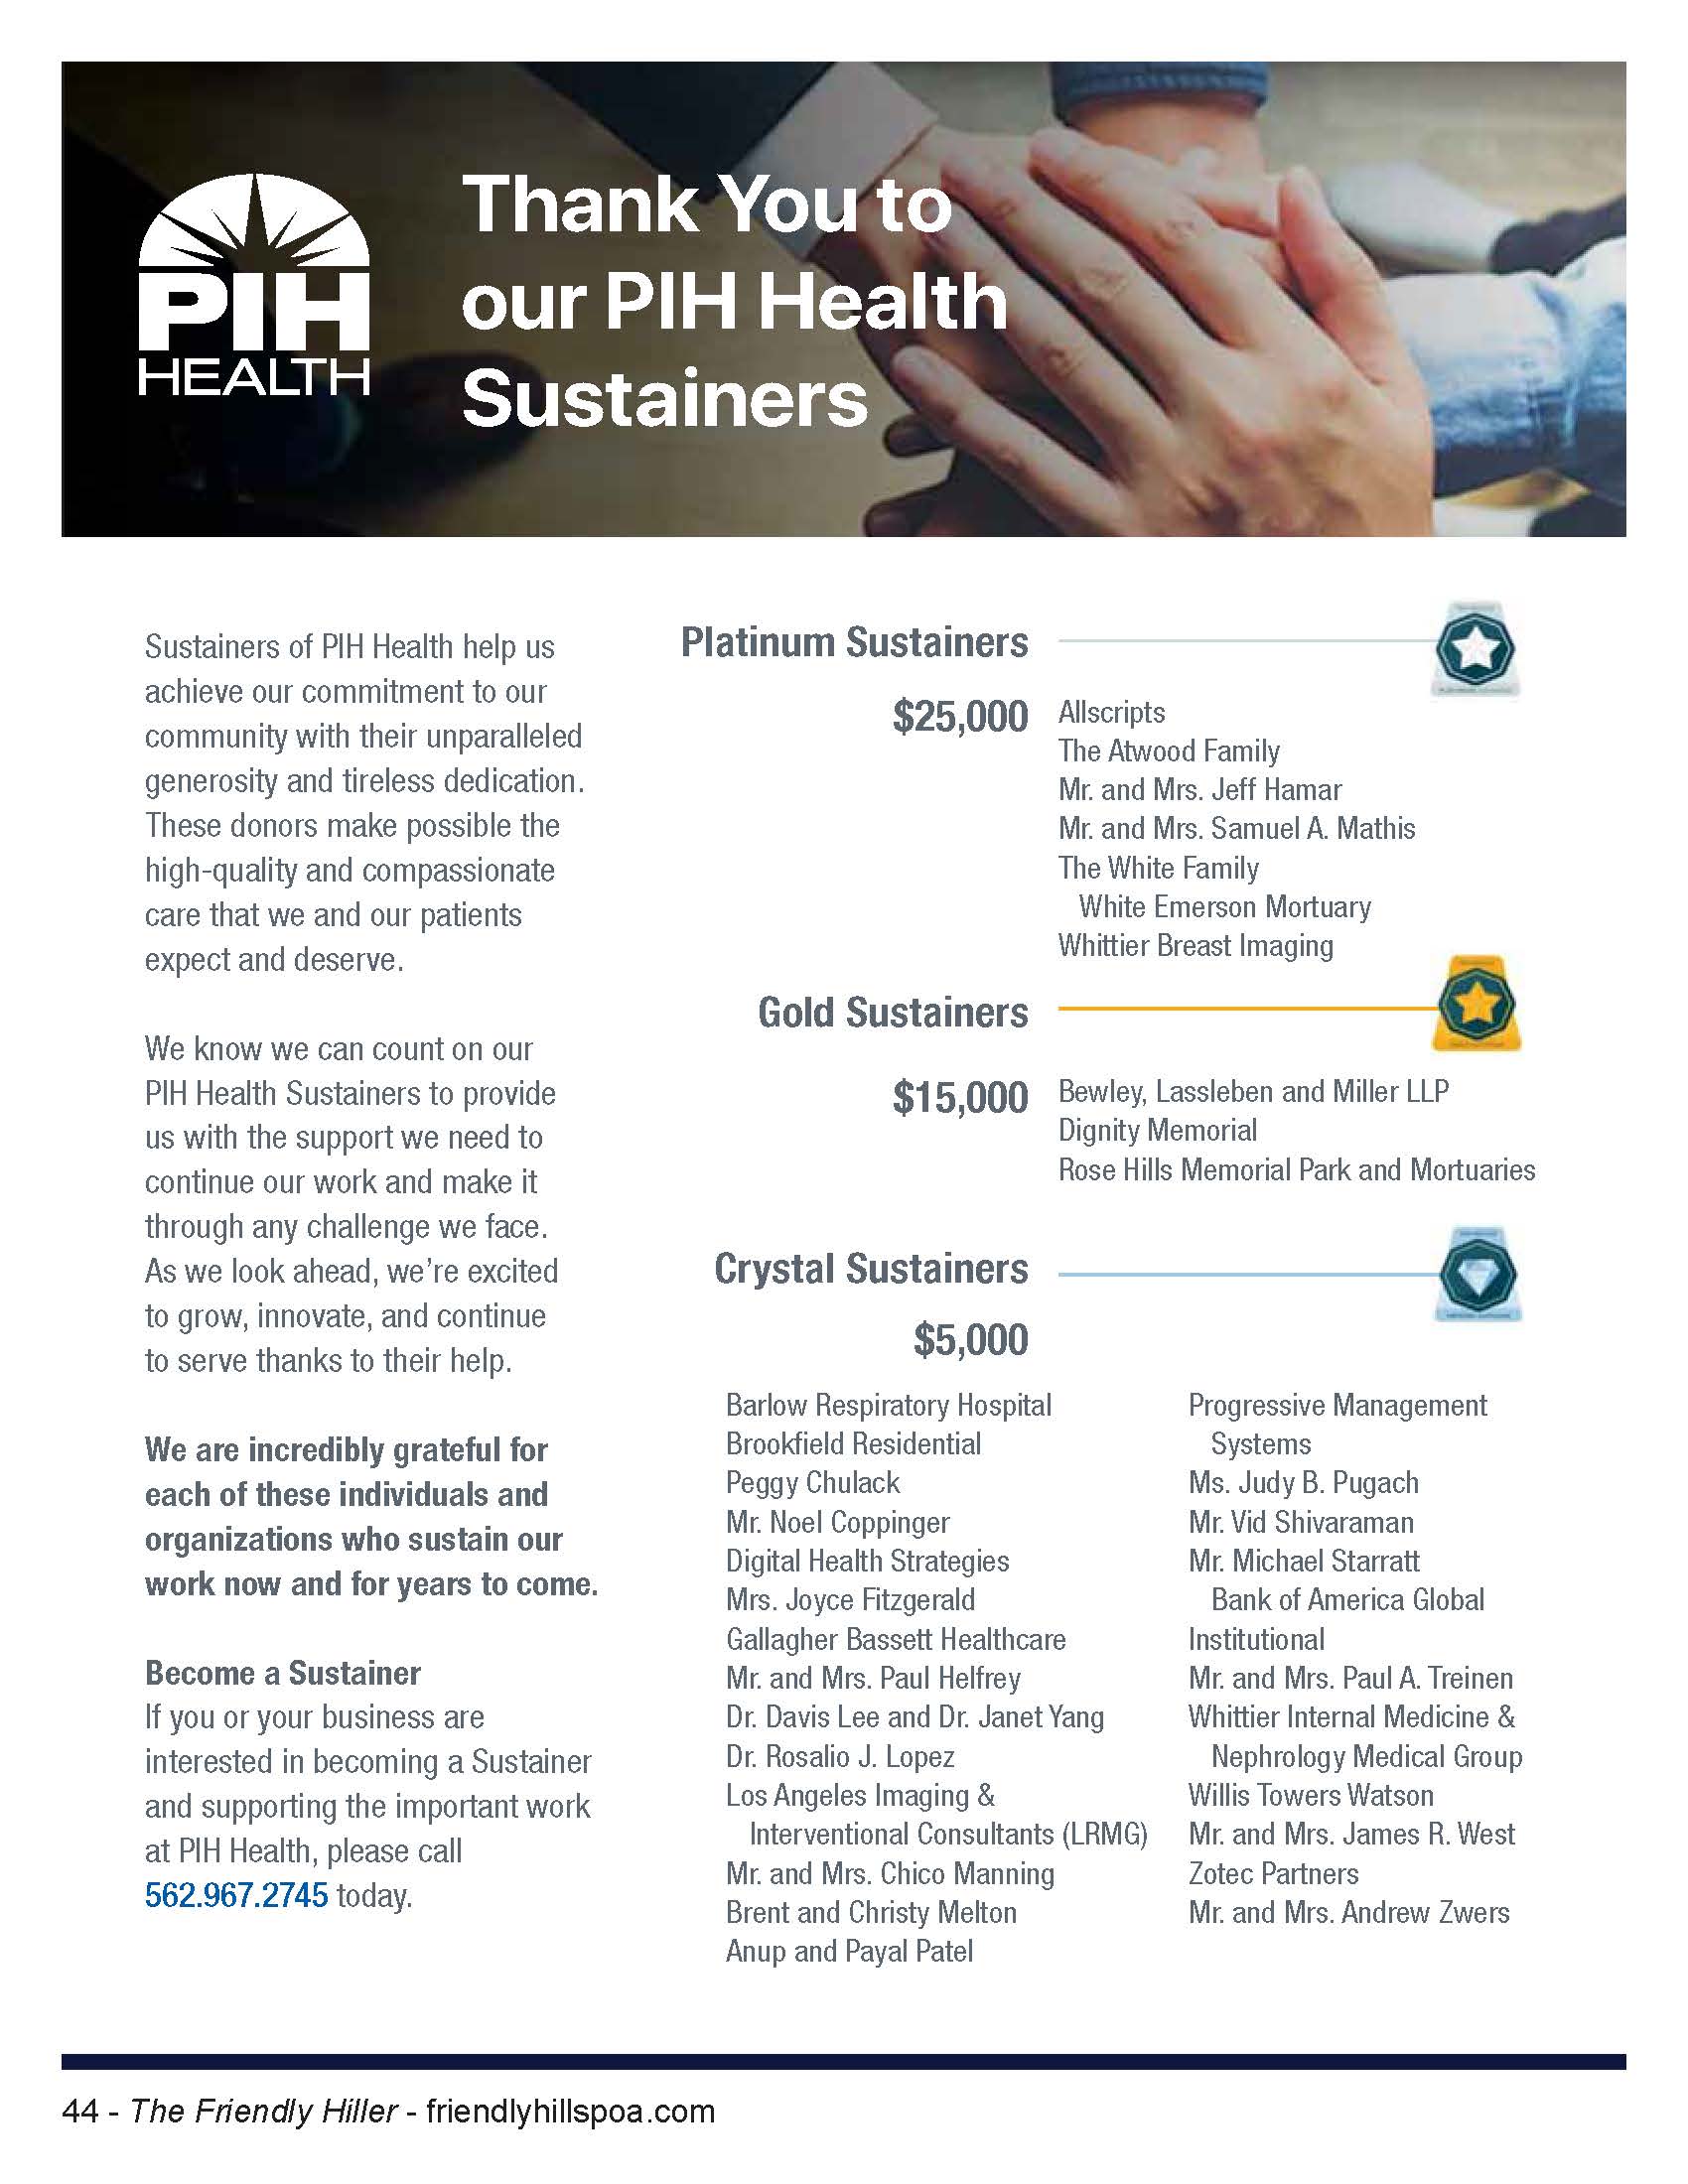 PIH Health Thank You to our PIH Health Sustainers